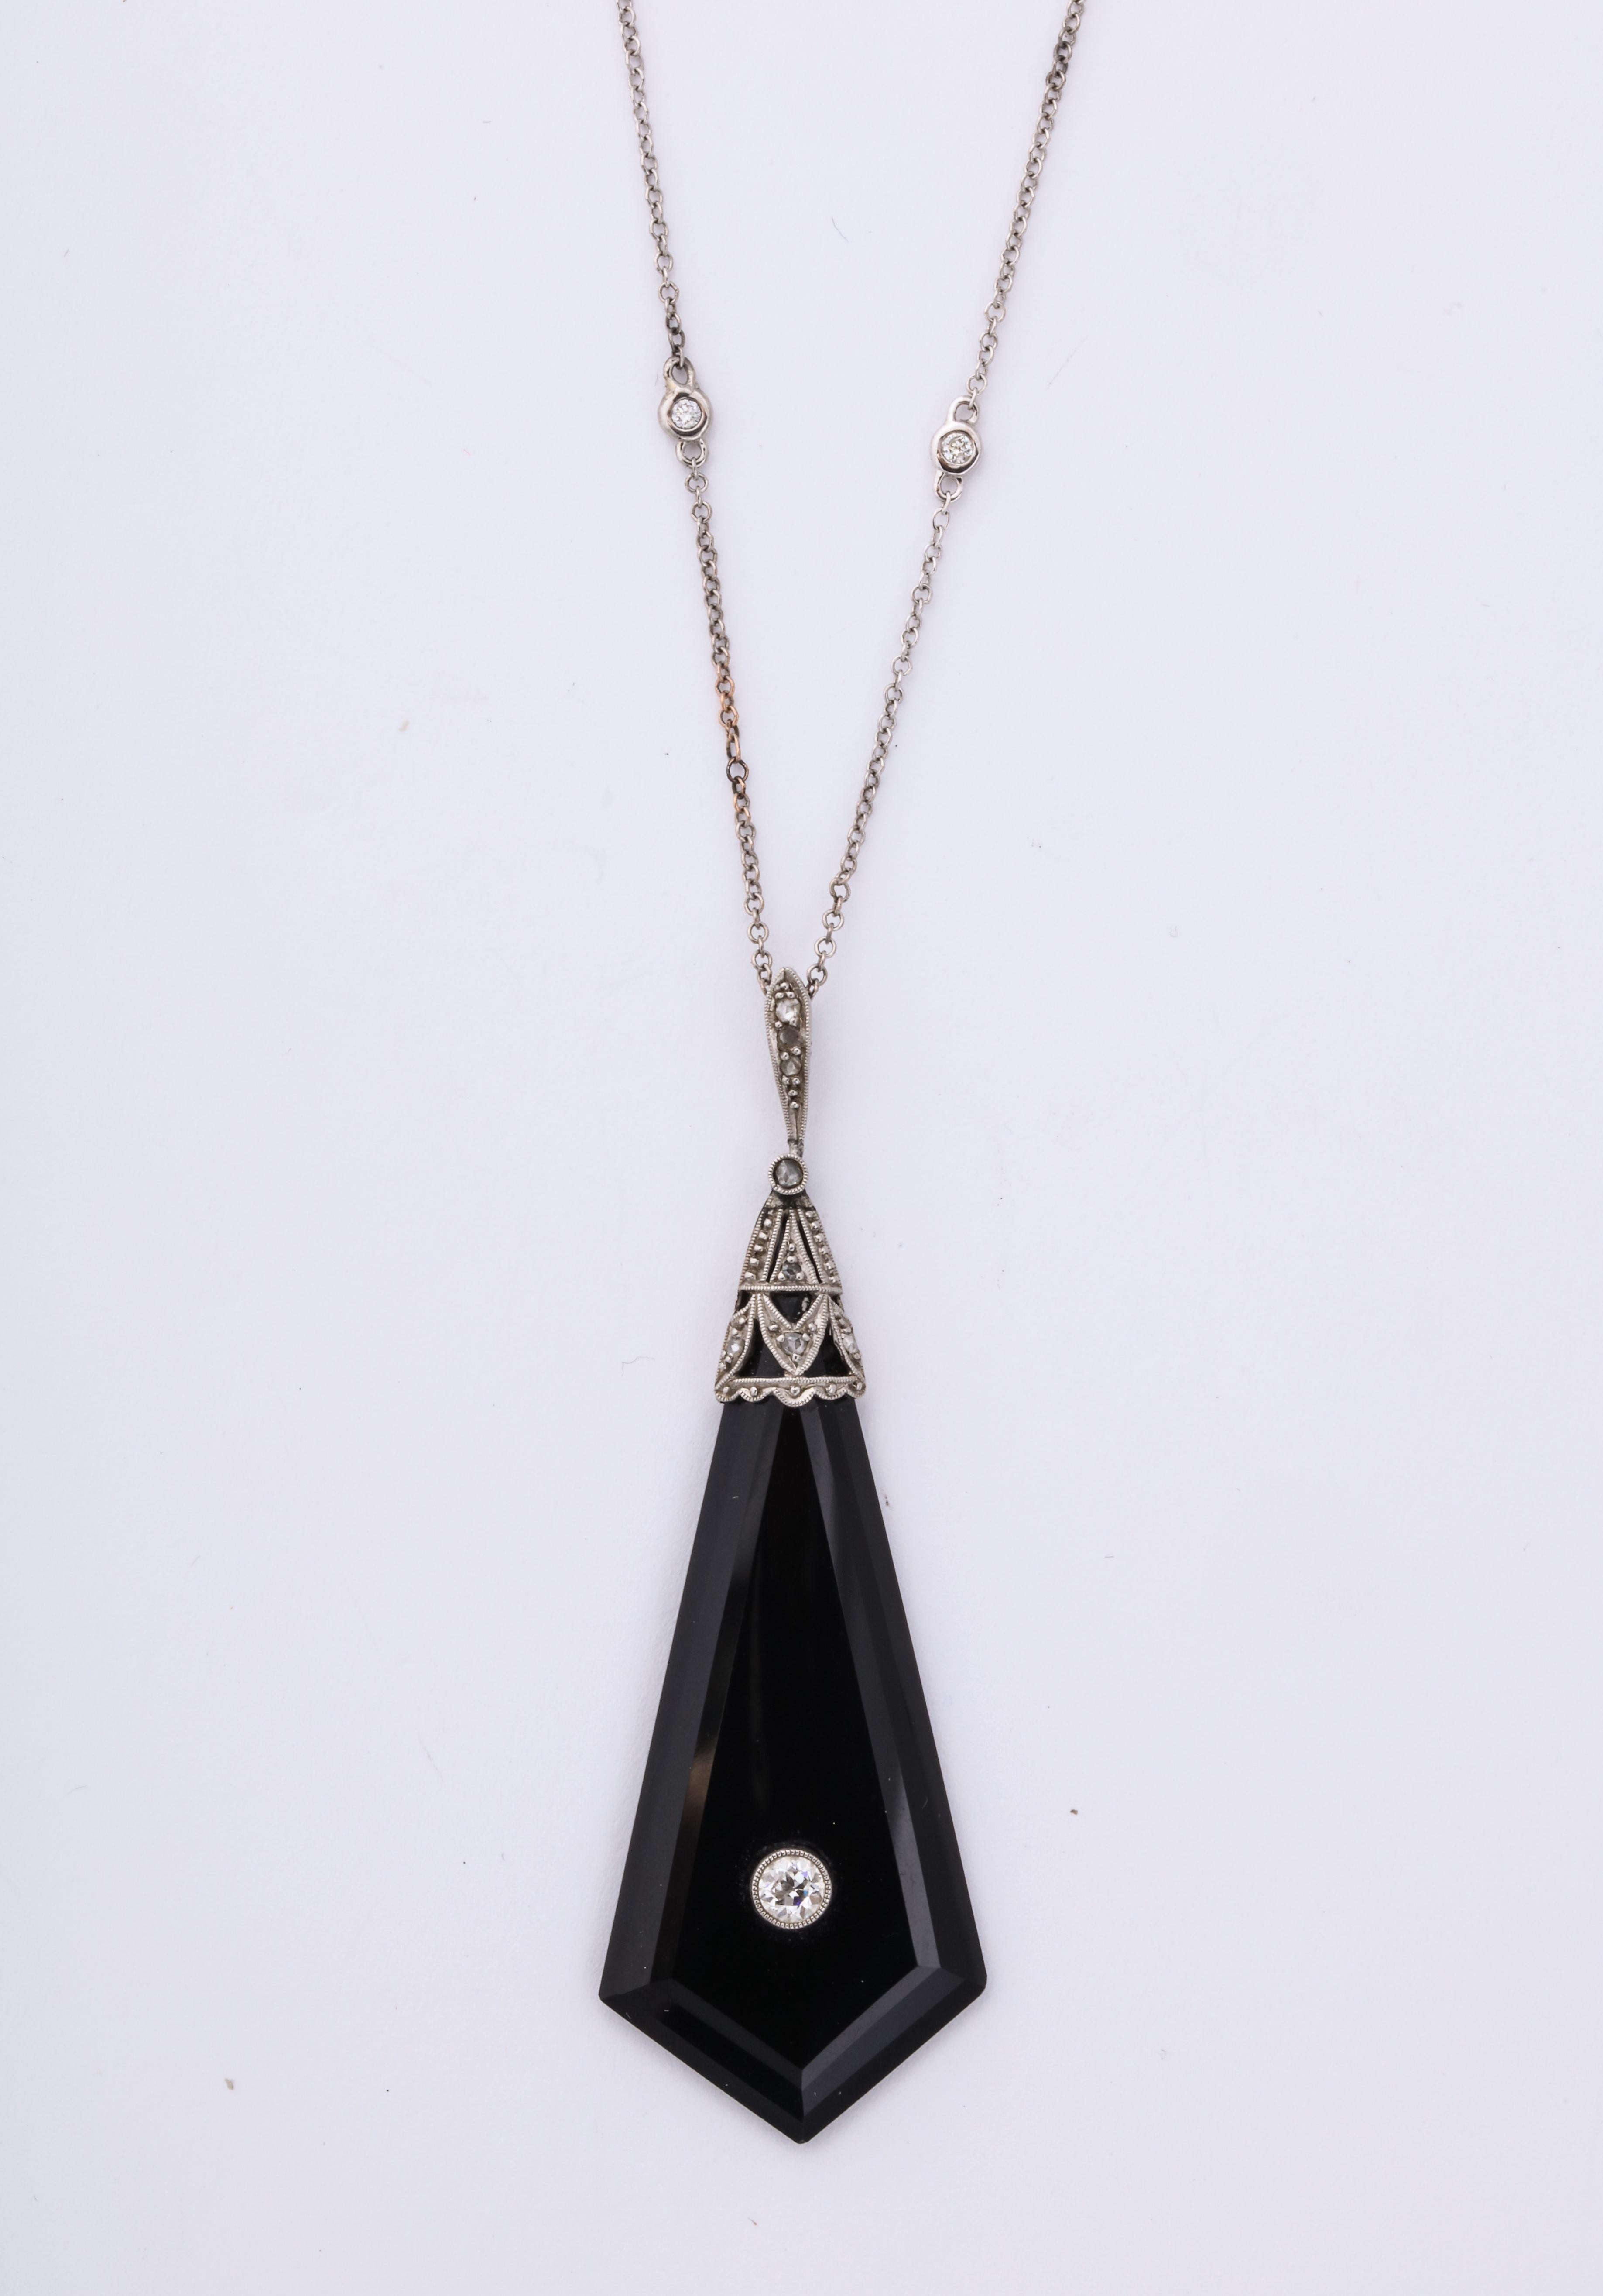 A great faceted onyx pendant with a diamond center. Diamonds are set along the white gold chain